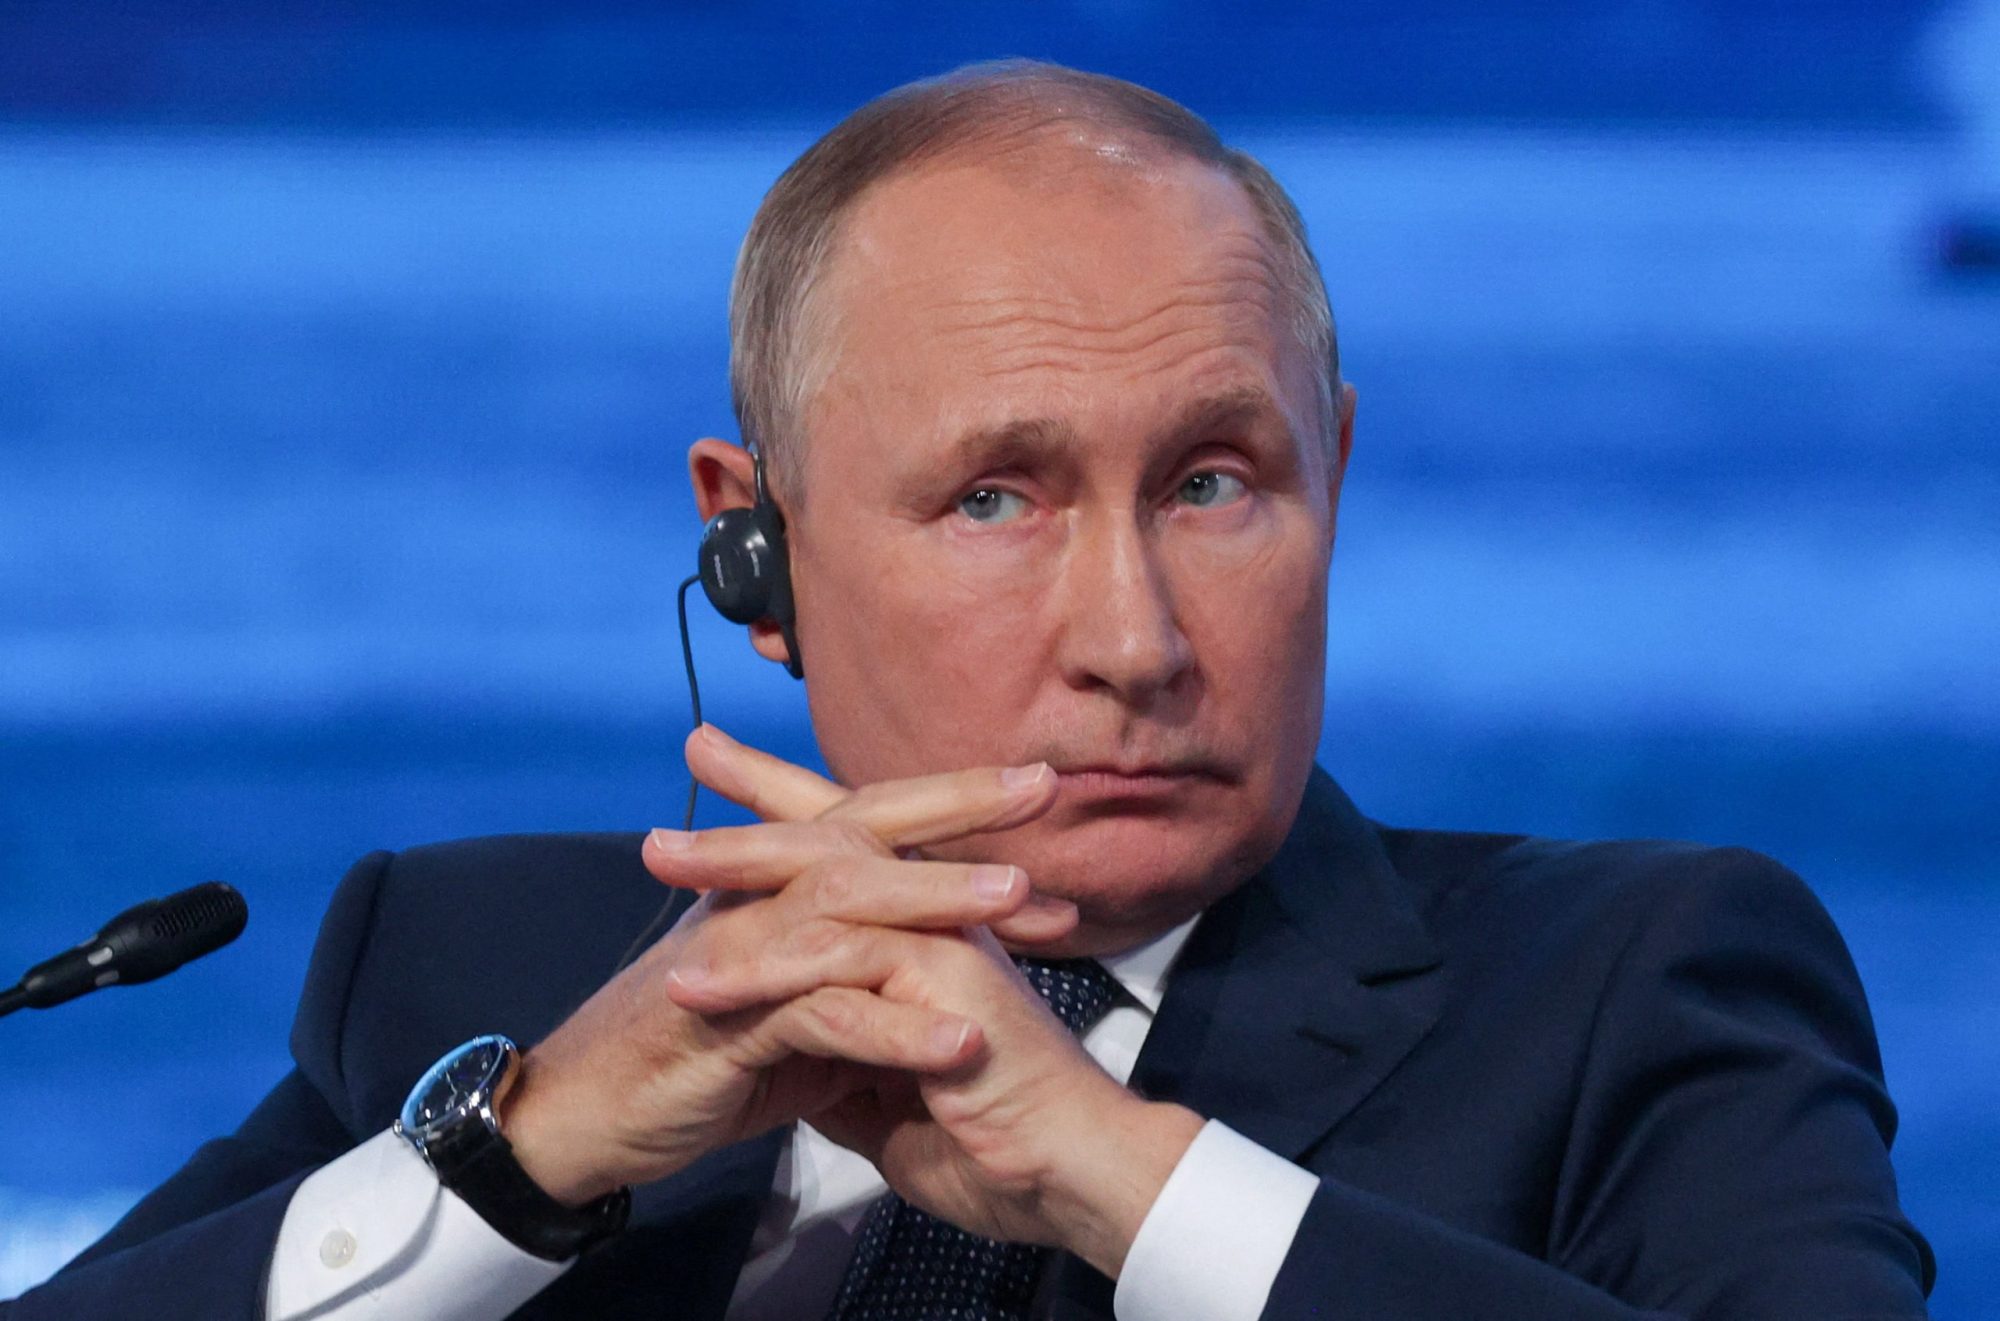 Can price caps on Russian oil tame the Kremlin? Our experts debate. -  Atlantic Council